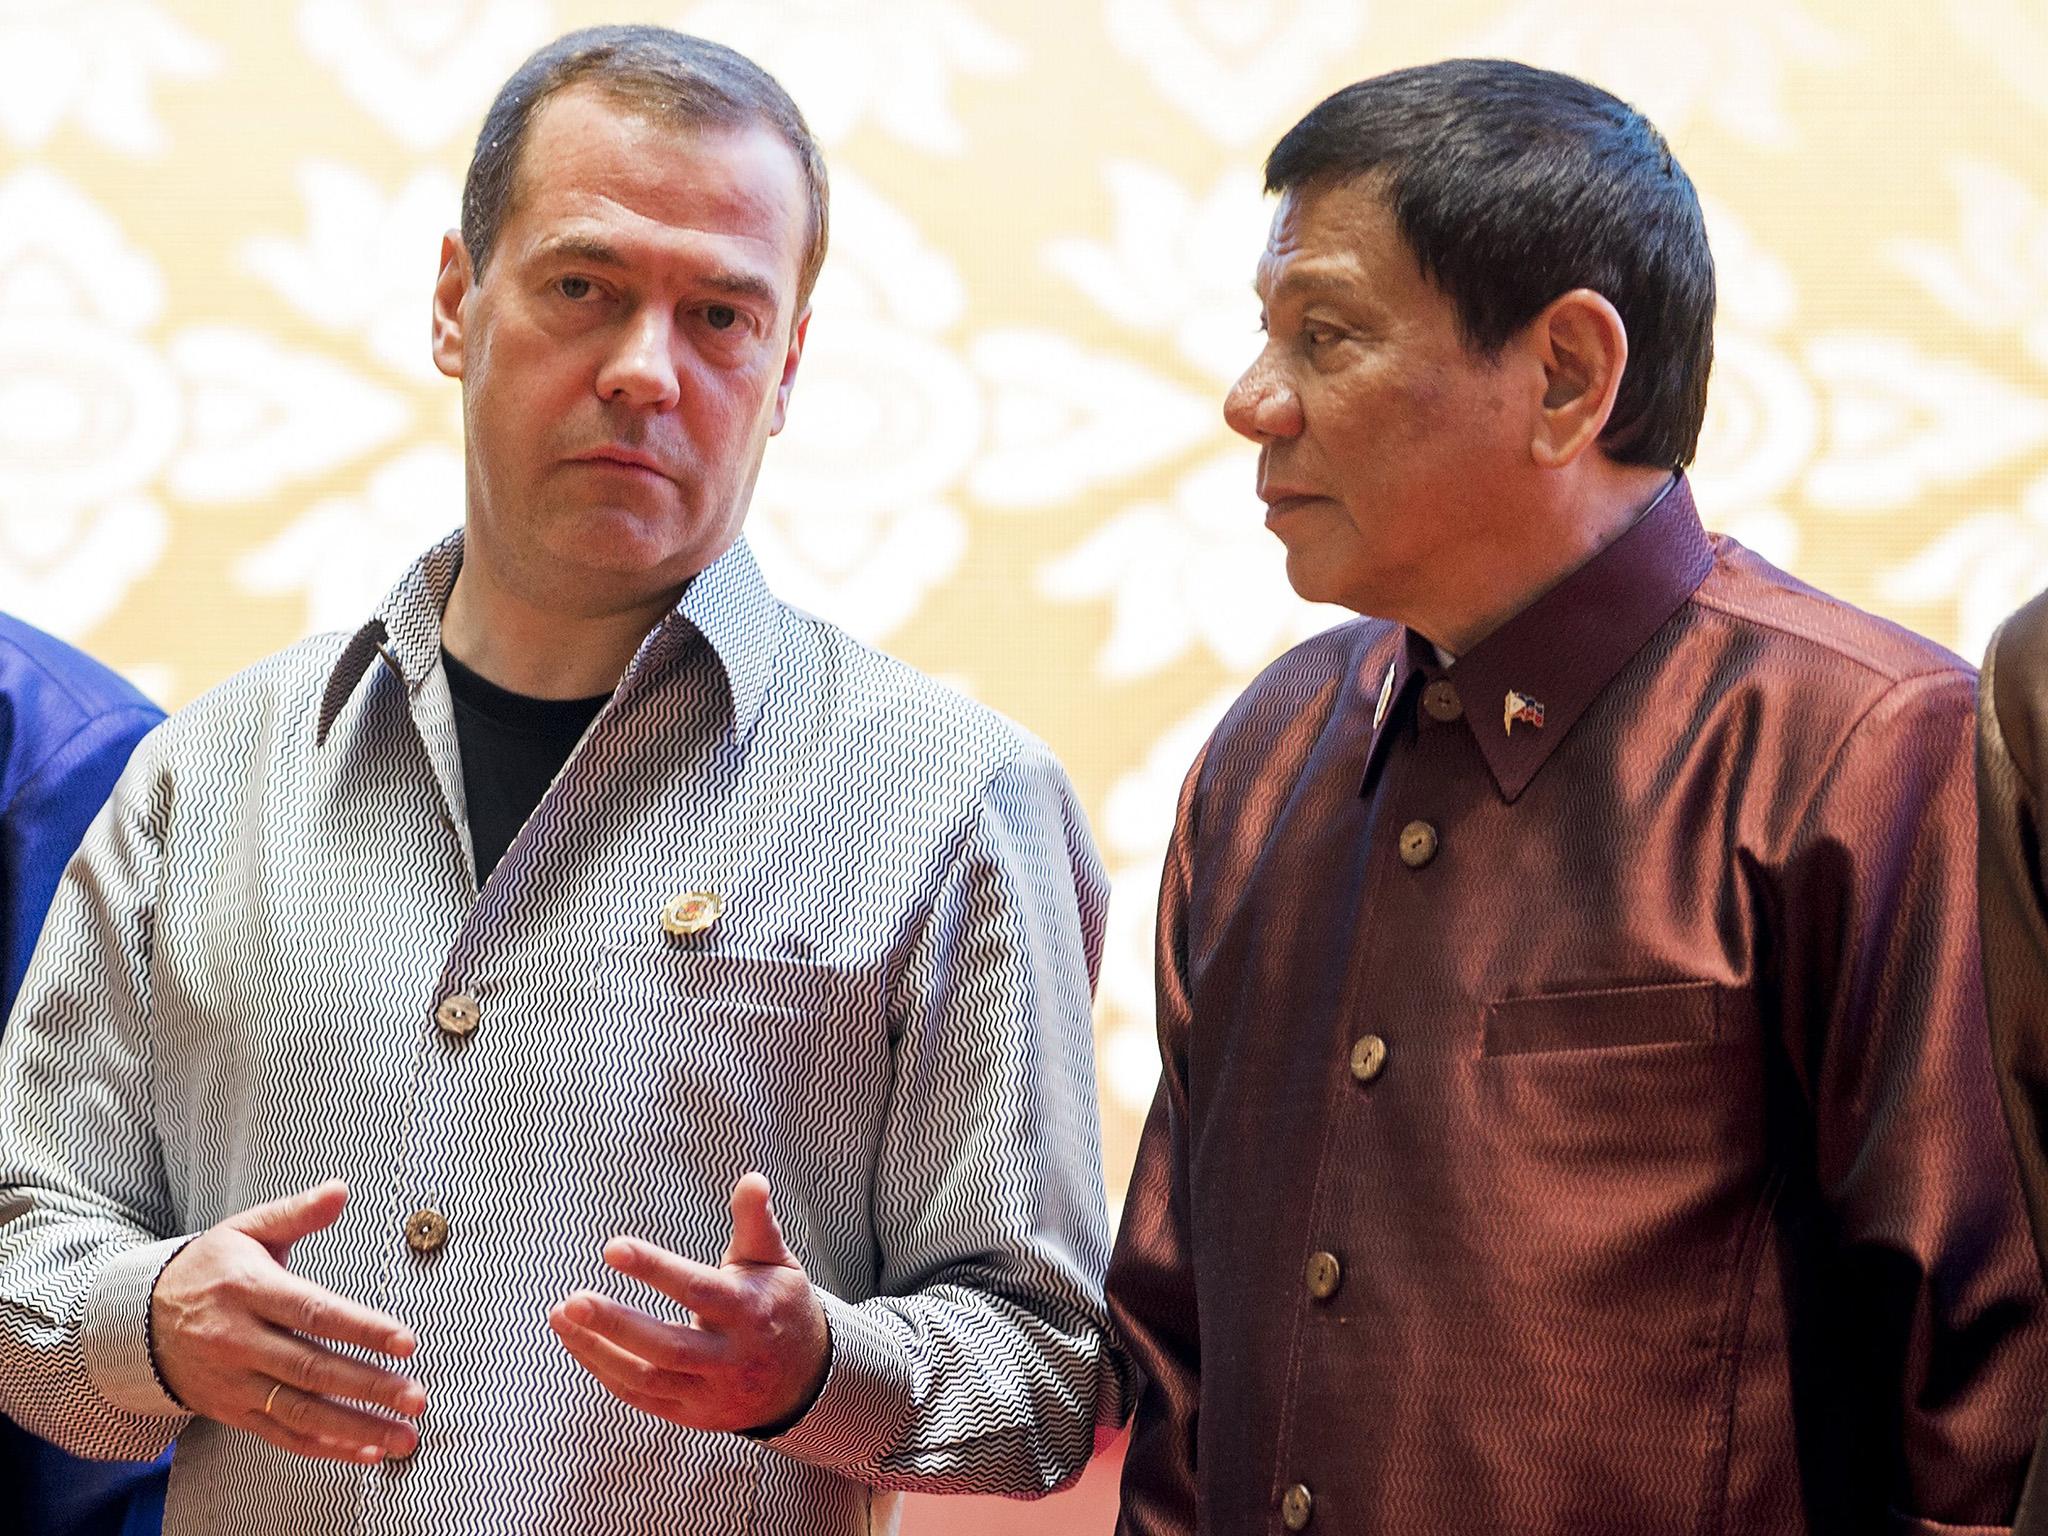 Russian prime minister Dmitry Medvedev reportedly 'got on well' with Philippine president Rodrigo Duterte during the former's recent visit to Laos